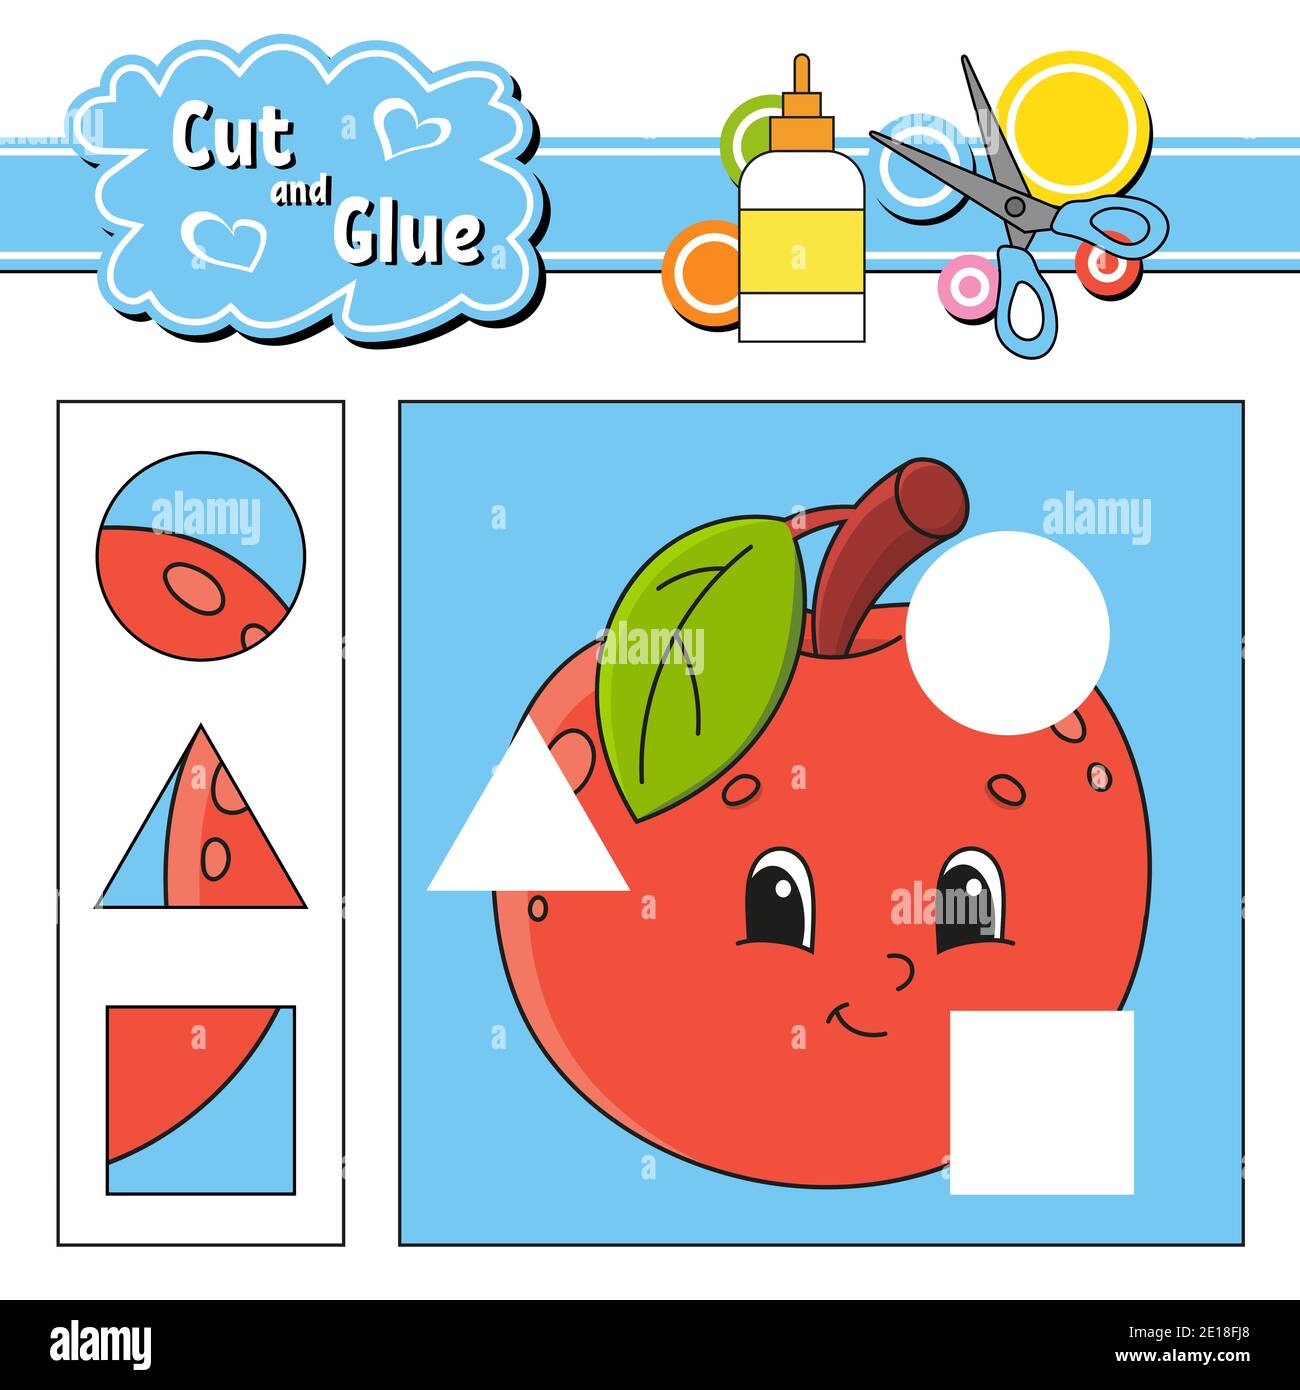 Cut and glue. Game for kids. Education developing worksheet. Cartoon apple character. Color activity page. Hand drawn. Isolated vector illustration. Stock Vector